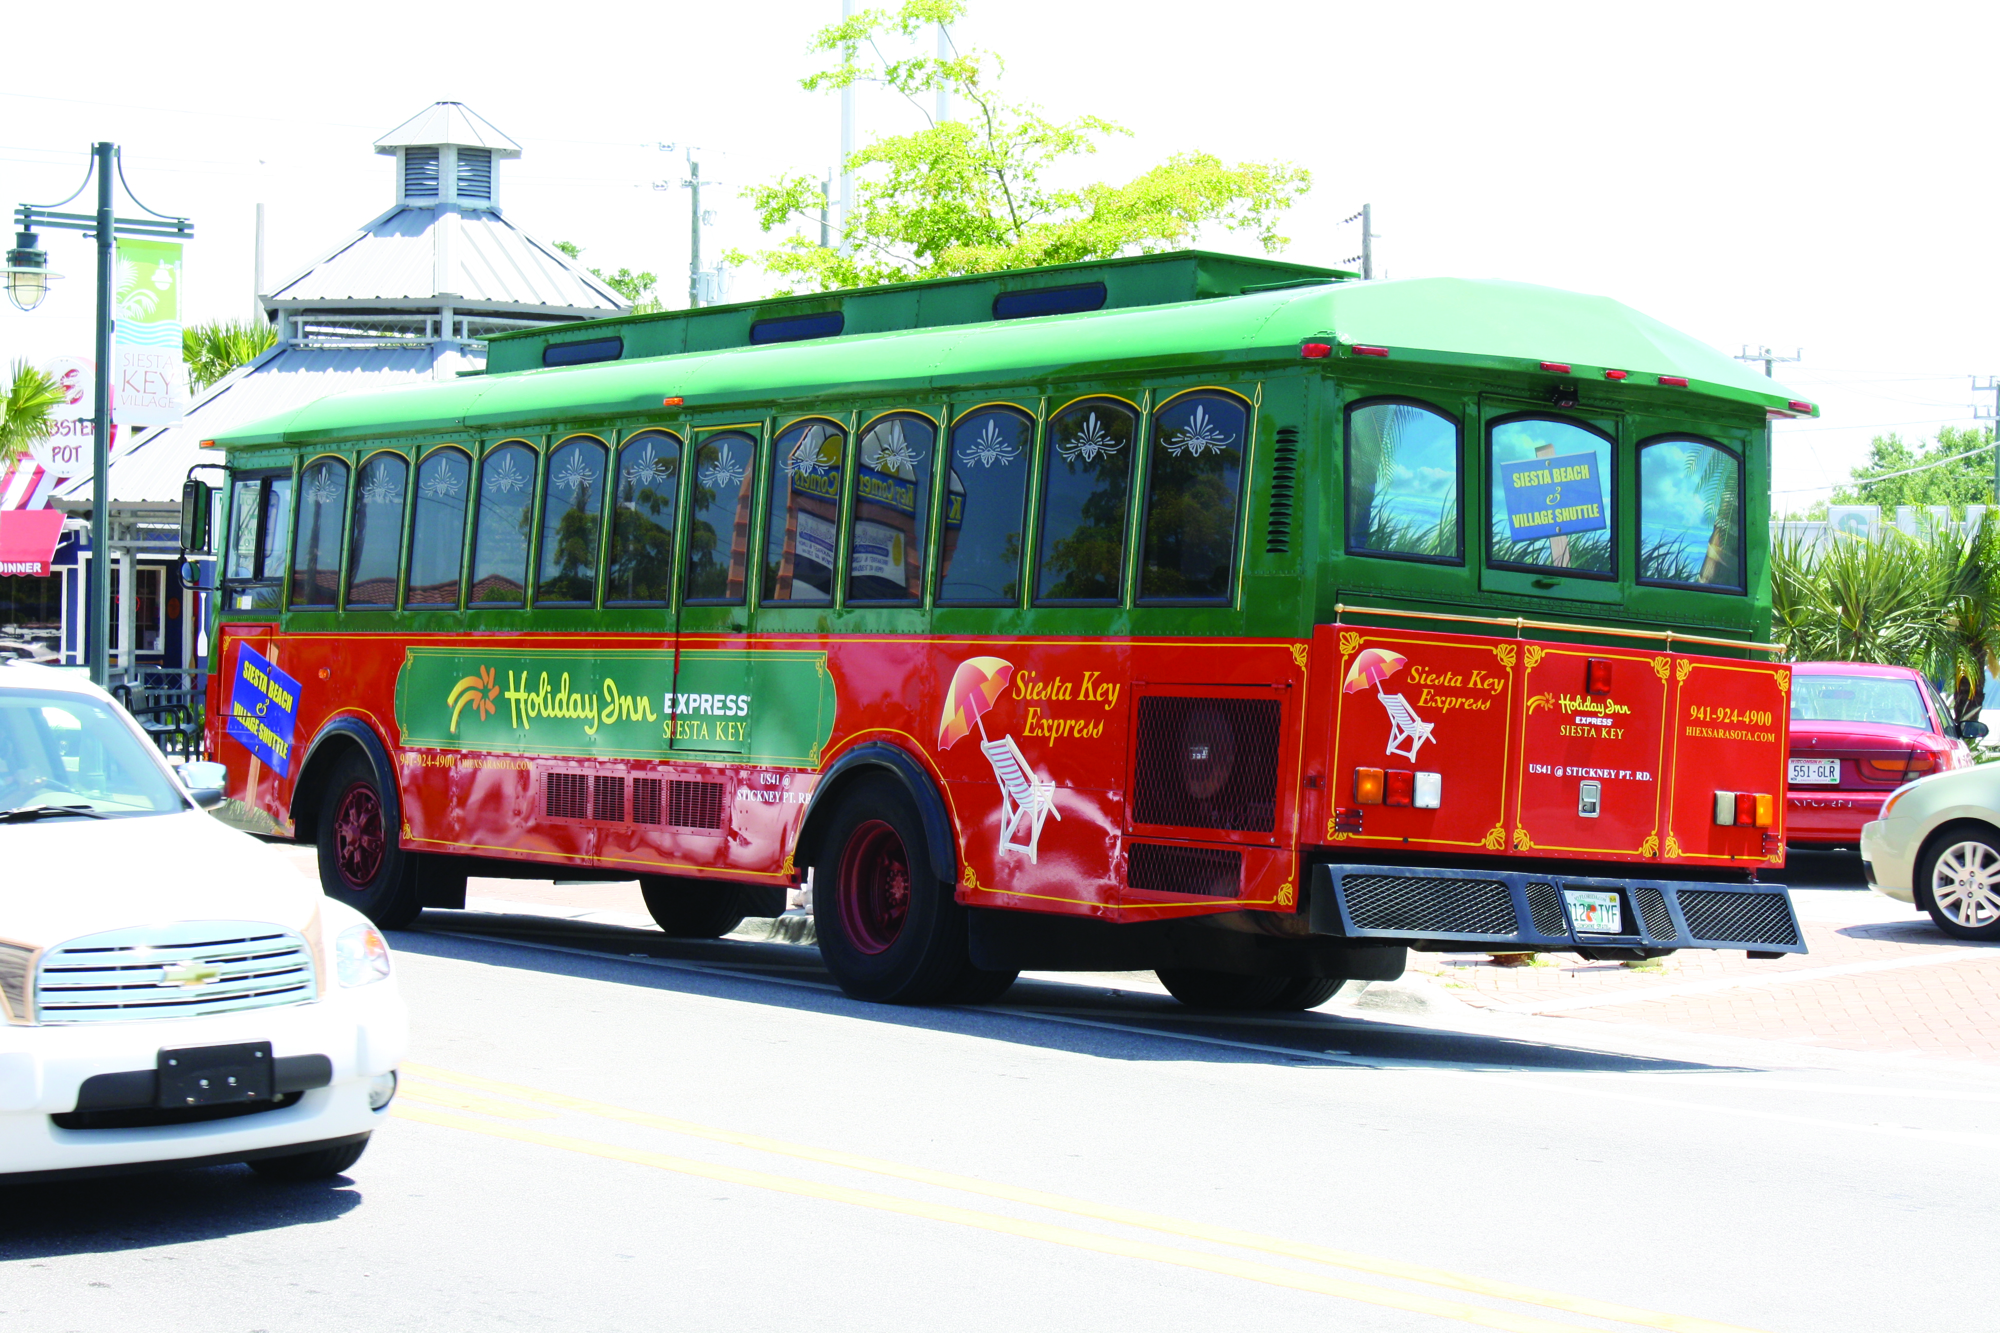 Commissioners discussed the possibility of using funds generated by a potential paid beach parking program to fund the Siesta Key Breeze Trolley.